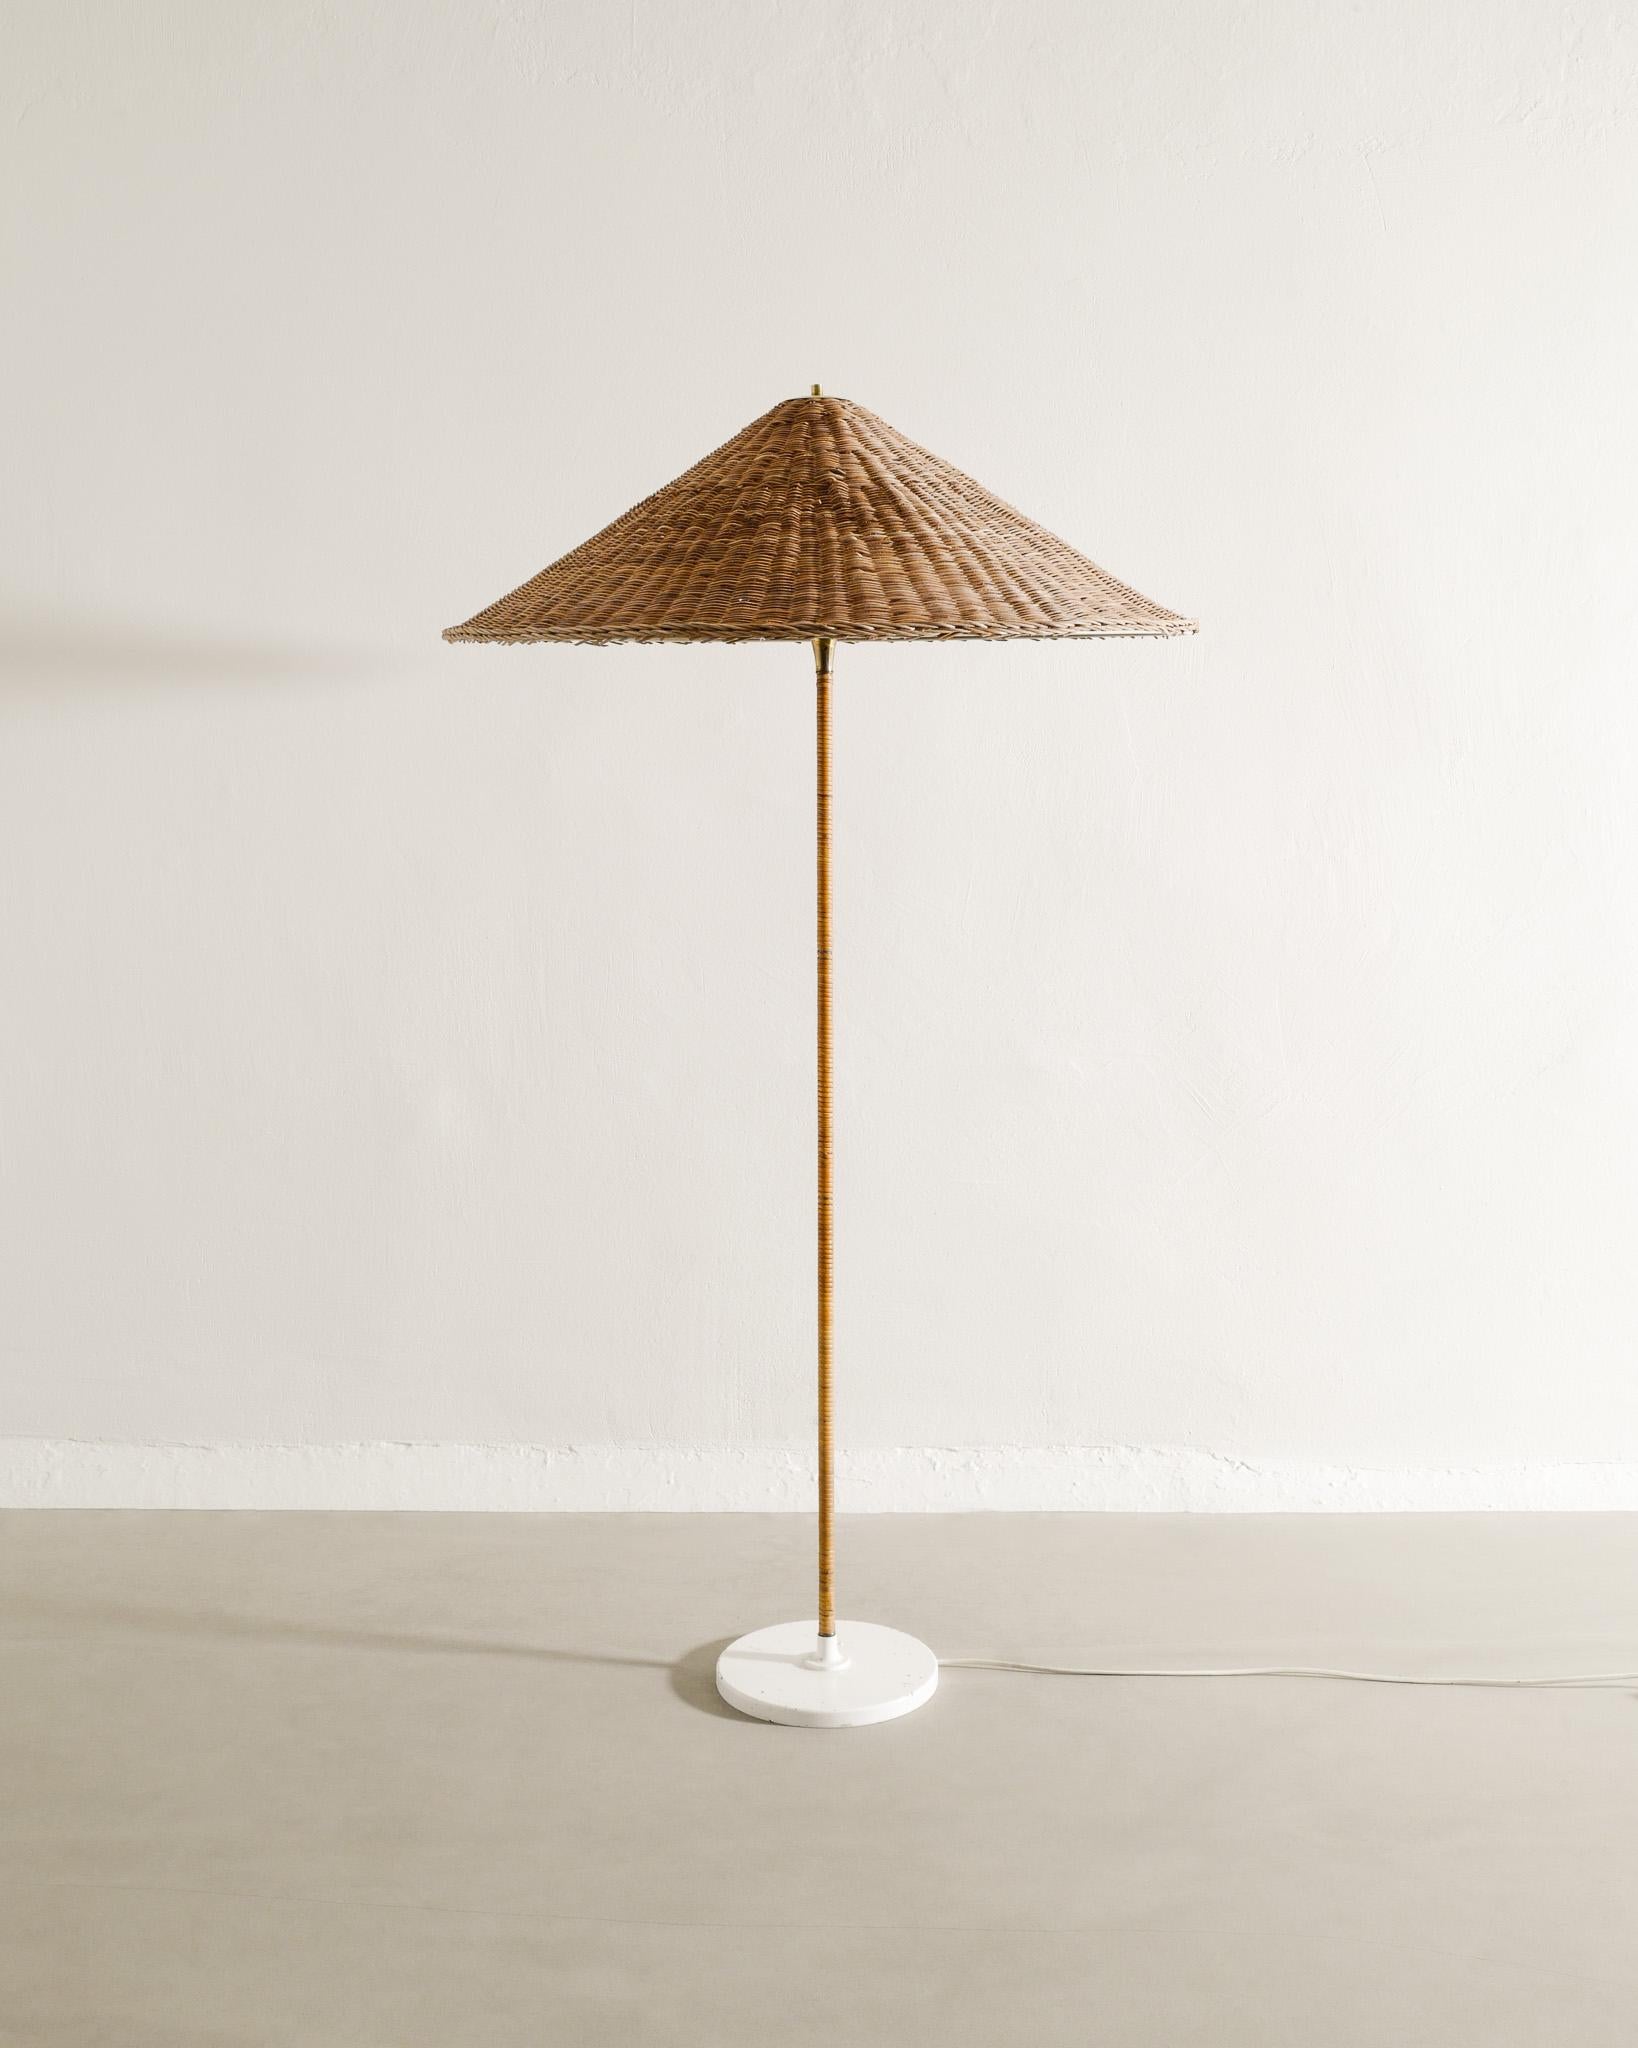 Very rare Finnish mid century floor lamp in style of the iconic 